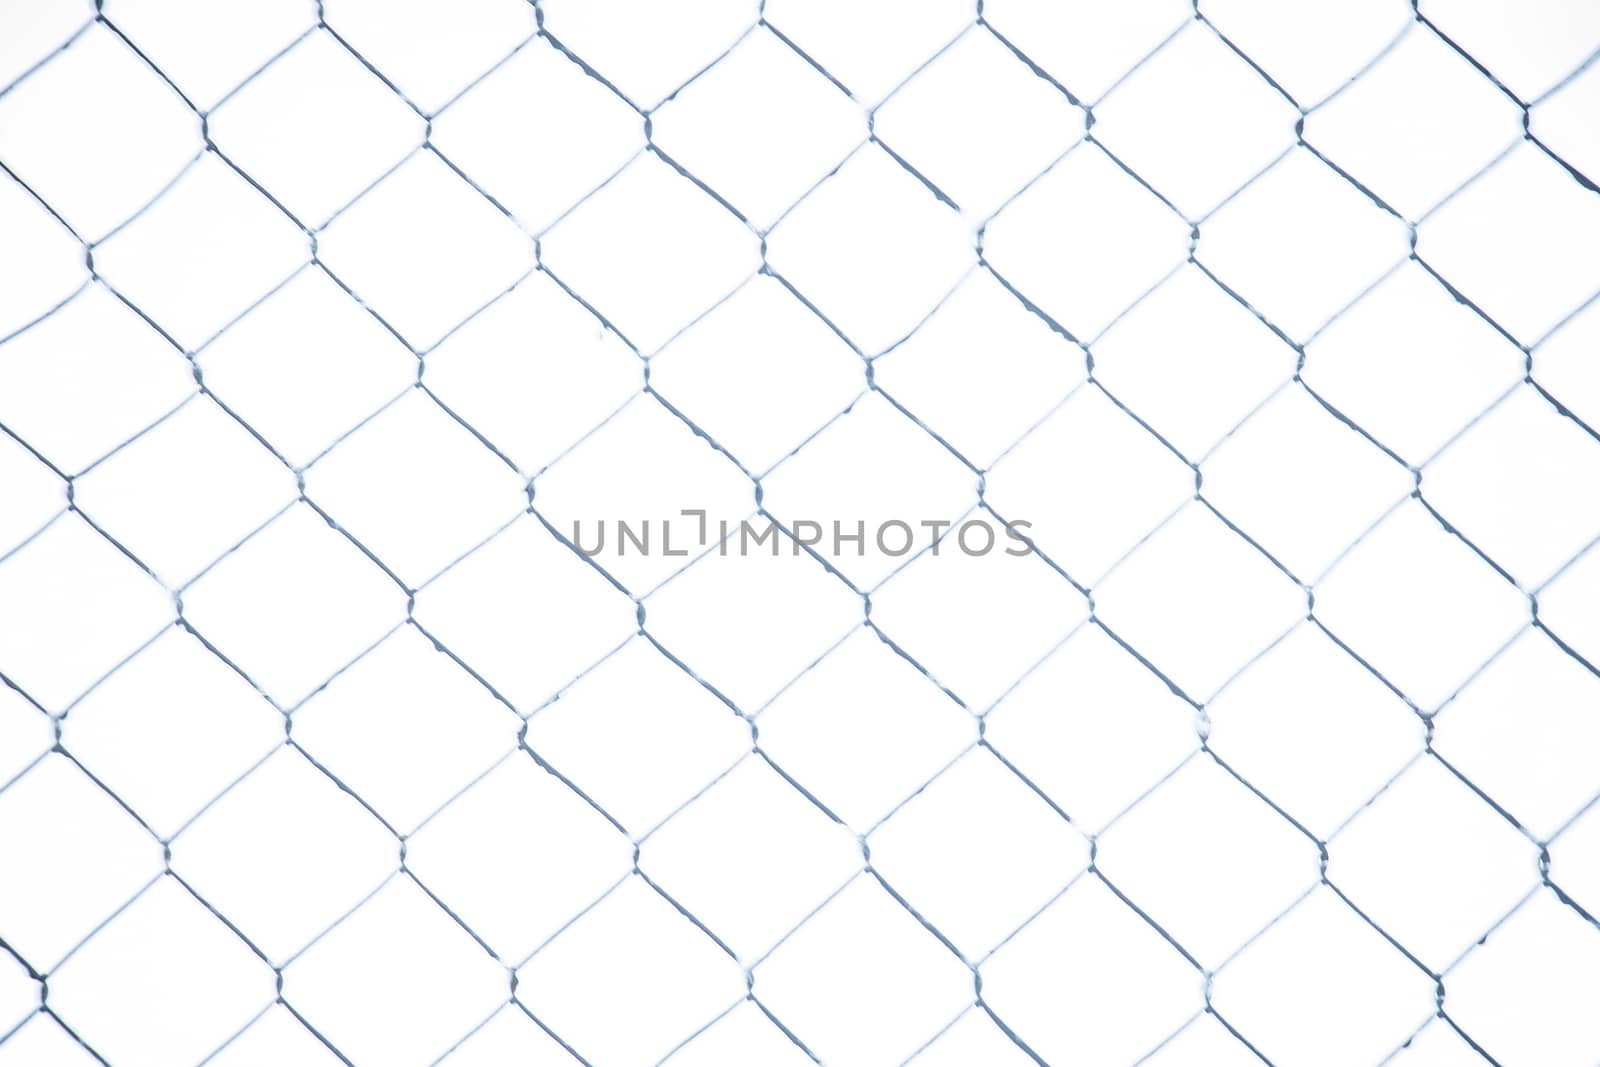 Wire fence in the snow. Fence background. Metallic net with snow. Metal net in winter covered with snow. Wire fence closeup. Steel wire mesh fence vintage effect. by kip02kas